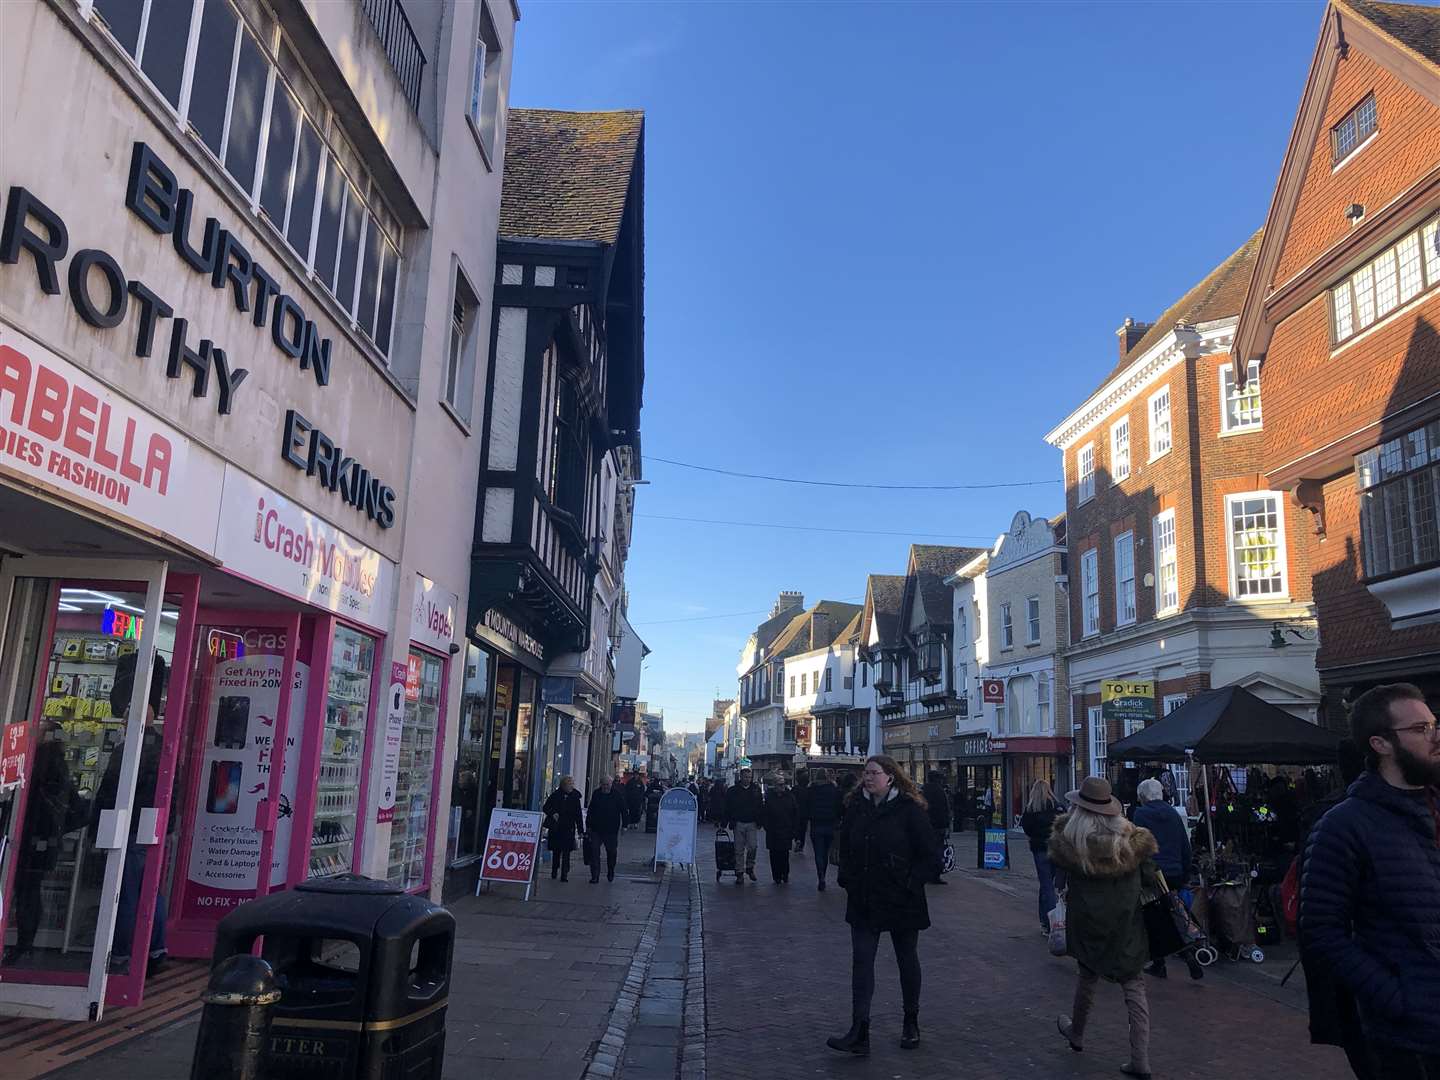 iCrash occupies some of the former Burton and Dorothy Perkins stores in Canterbury's high street